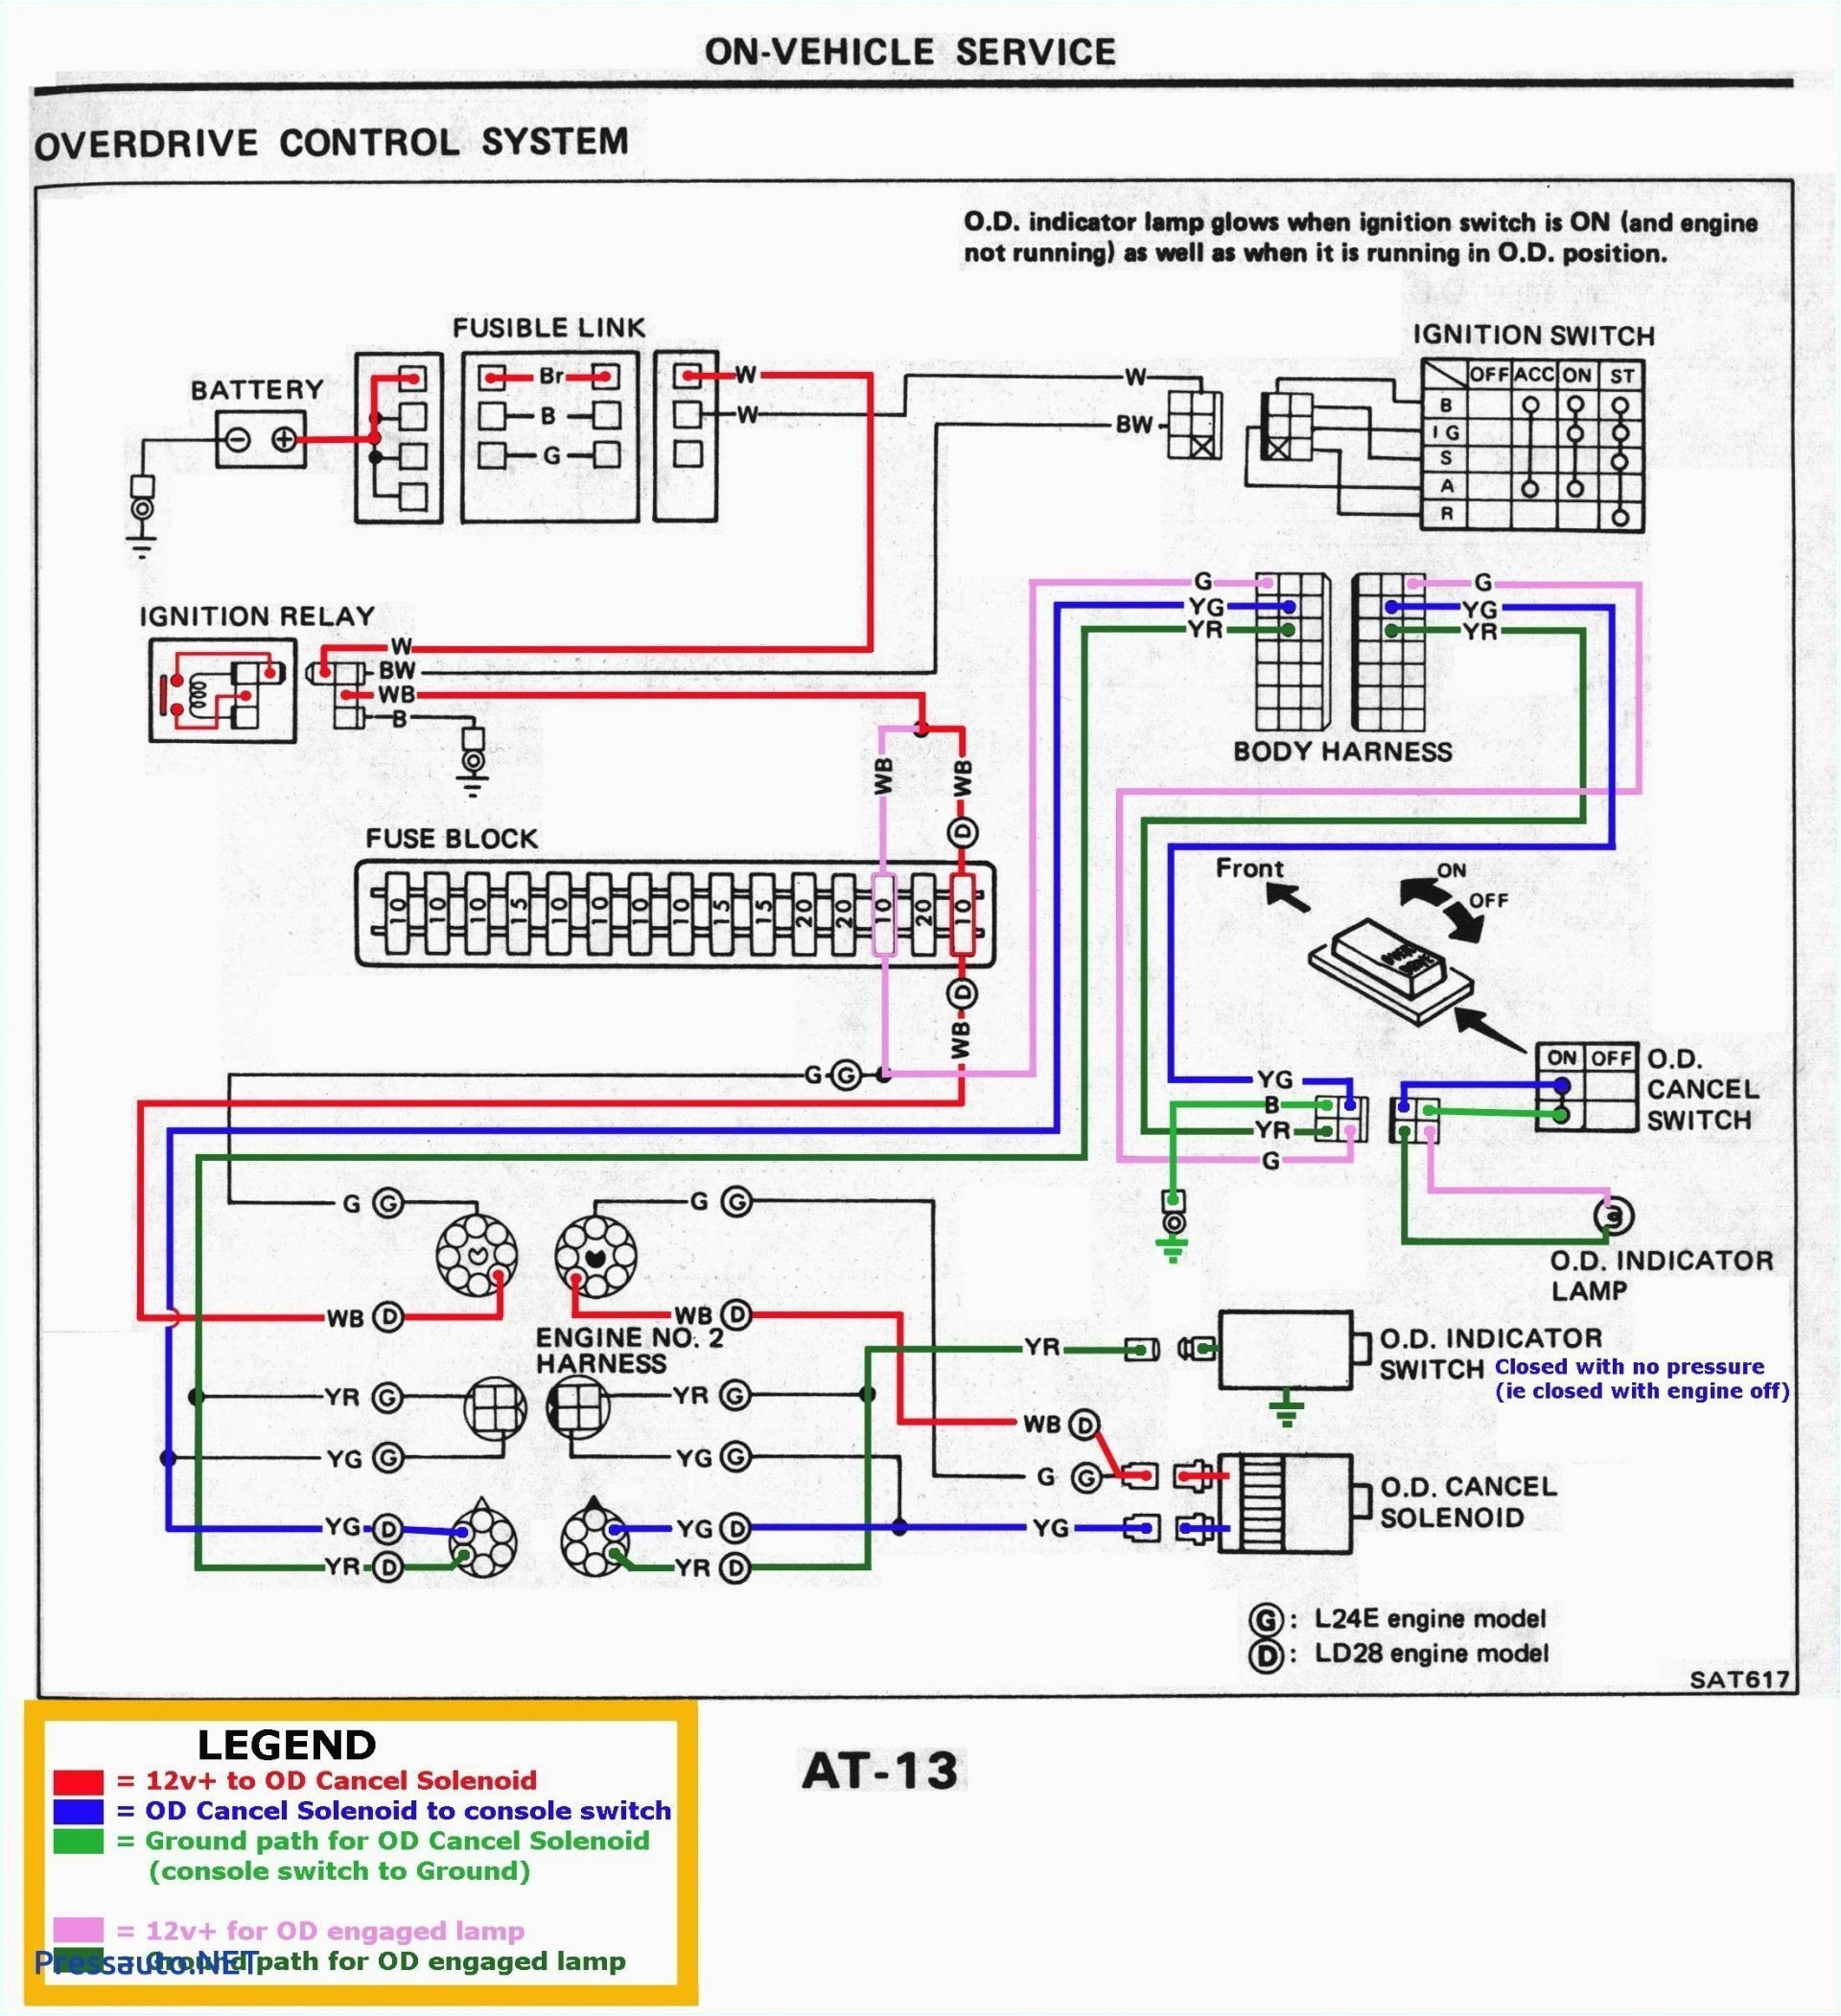 basic electrical wiring interview questions auto wiring diagram electrical wiring interview questions basic electrical wiring interview questions